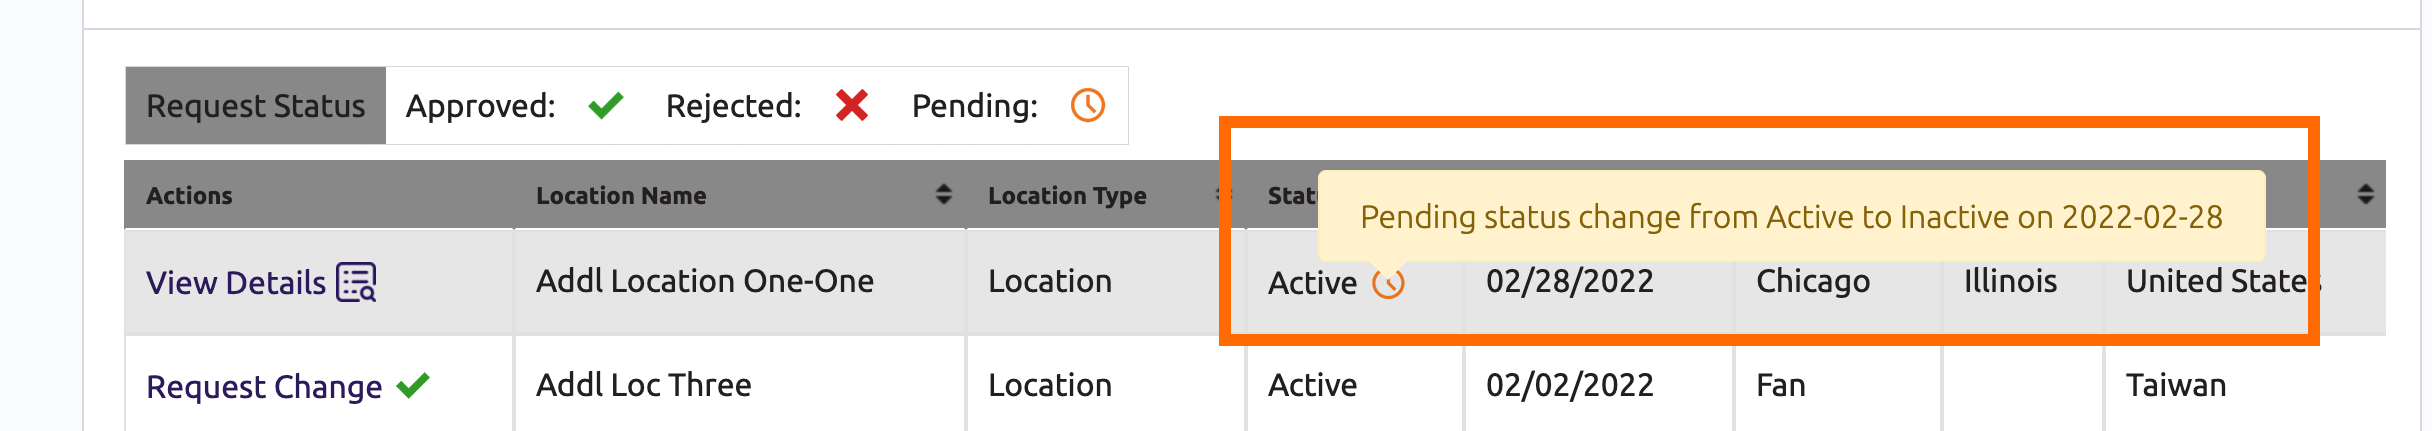 Pending status change from active to inactive on 2022-02-28